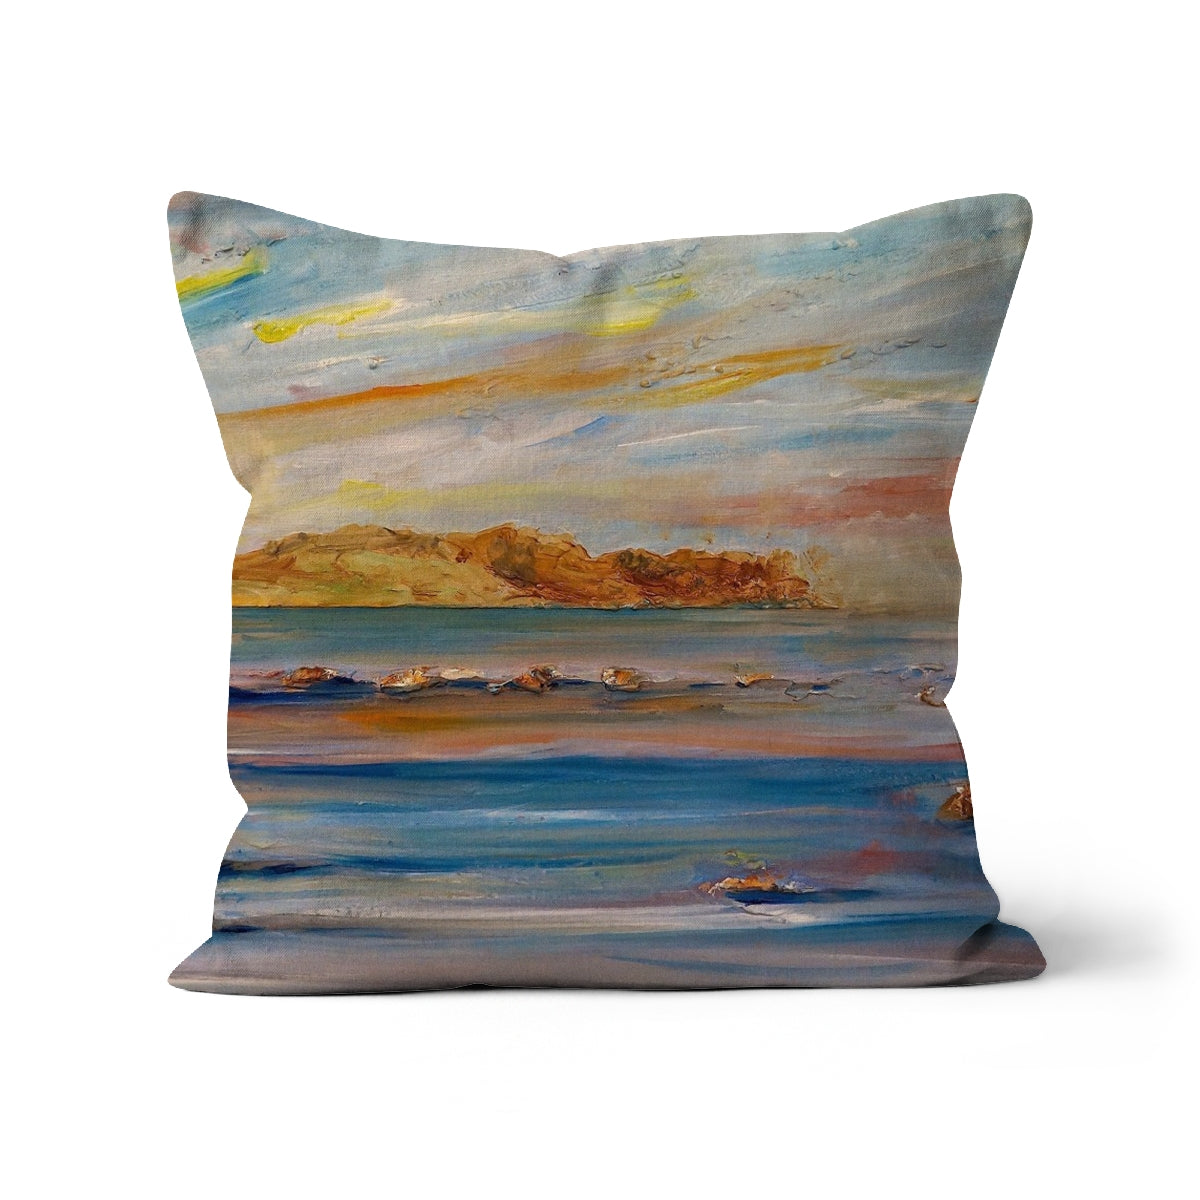 Tiree Dawn Art Gifts Cushion-Cushions-Hebridean Islands Art Gallery-Canvas-18"x18"-Paintings, Prints, Homeware, Art Gifts From Scotland By Scottish Artist Kevin Hunter